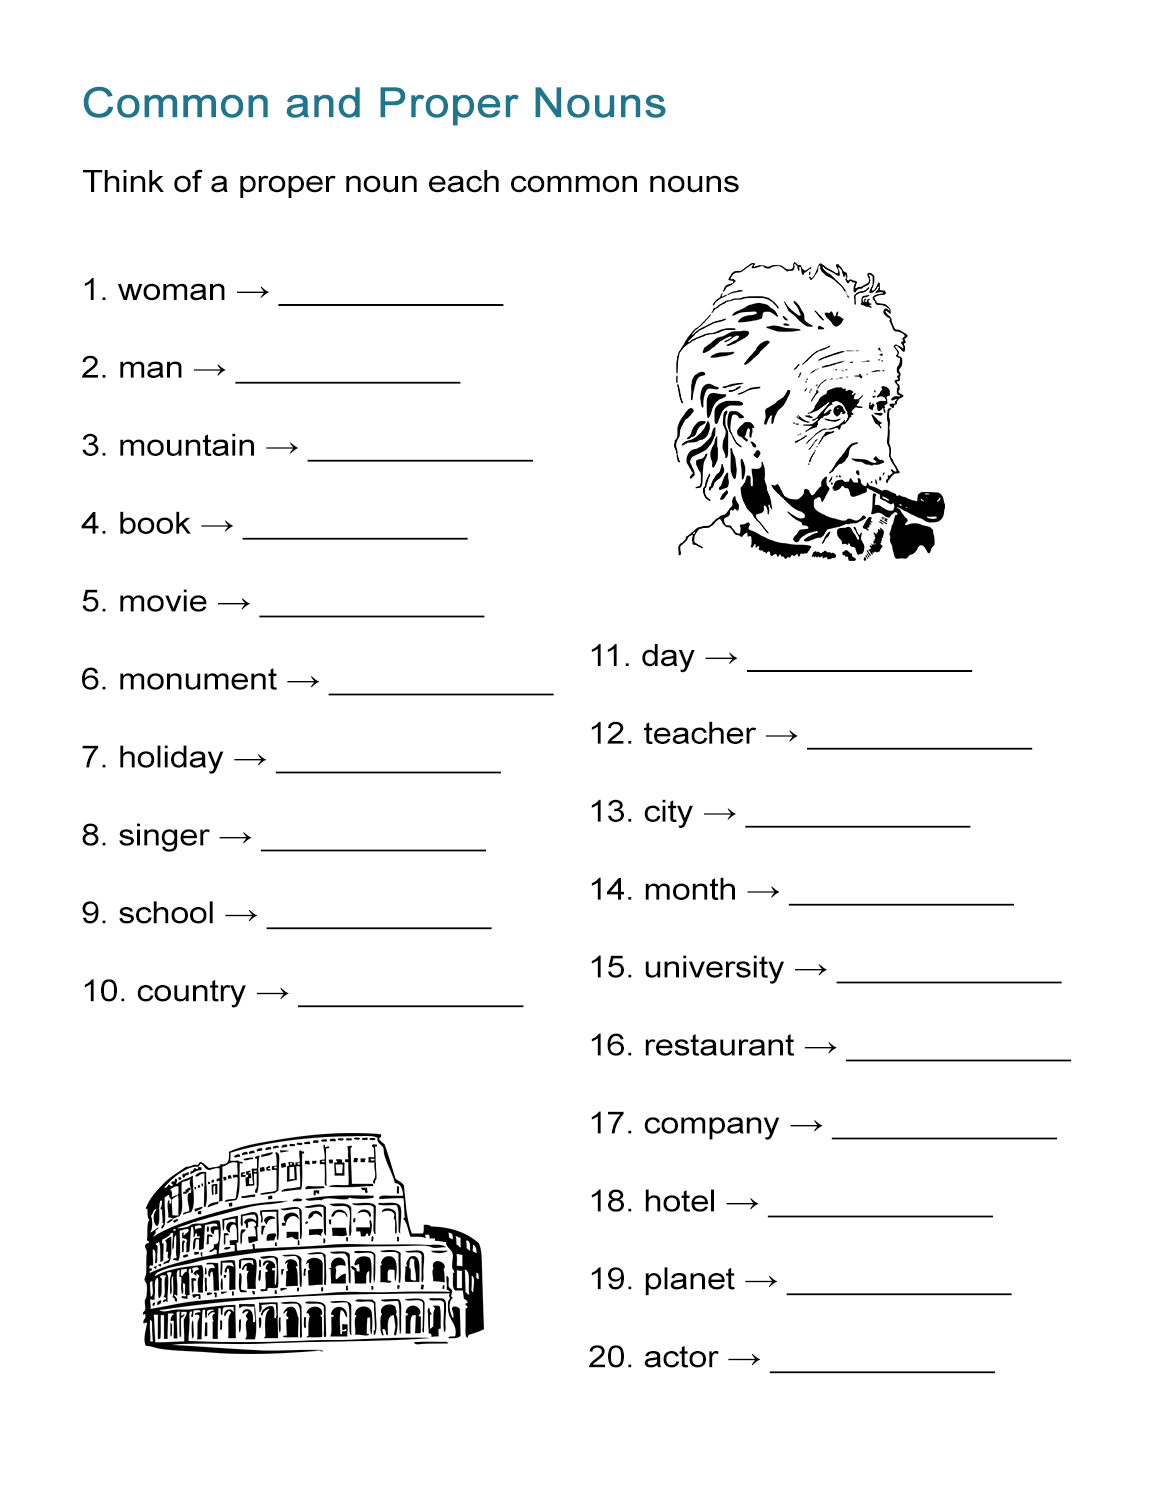 Common and Proper Nouns Worksheet [Brainstorming Activity] - ALL ESL Throughout Types Of Nouns Worksheet